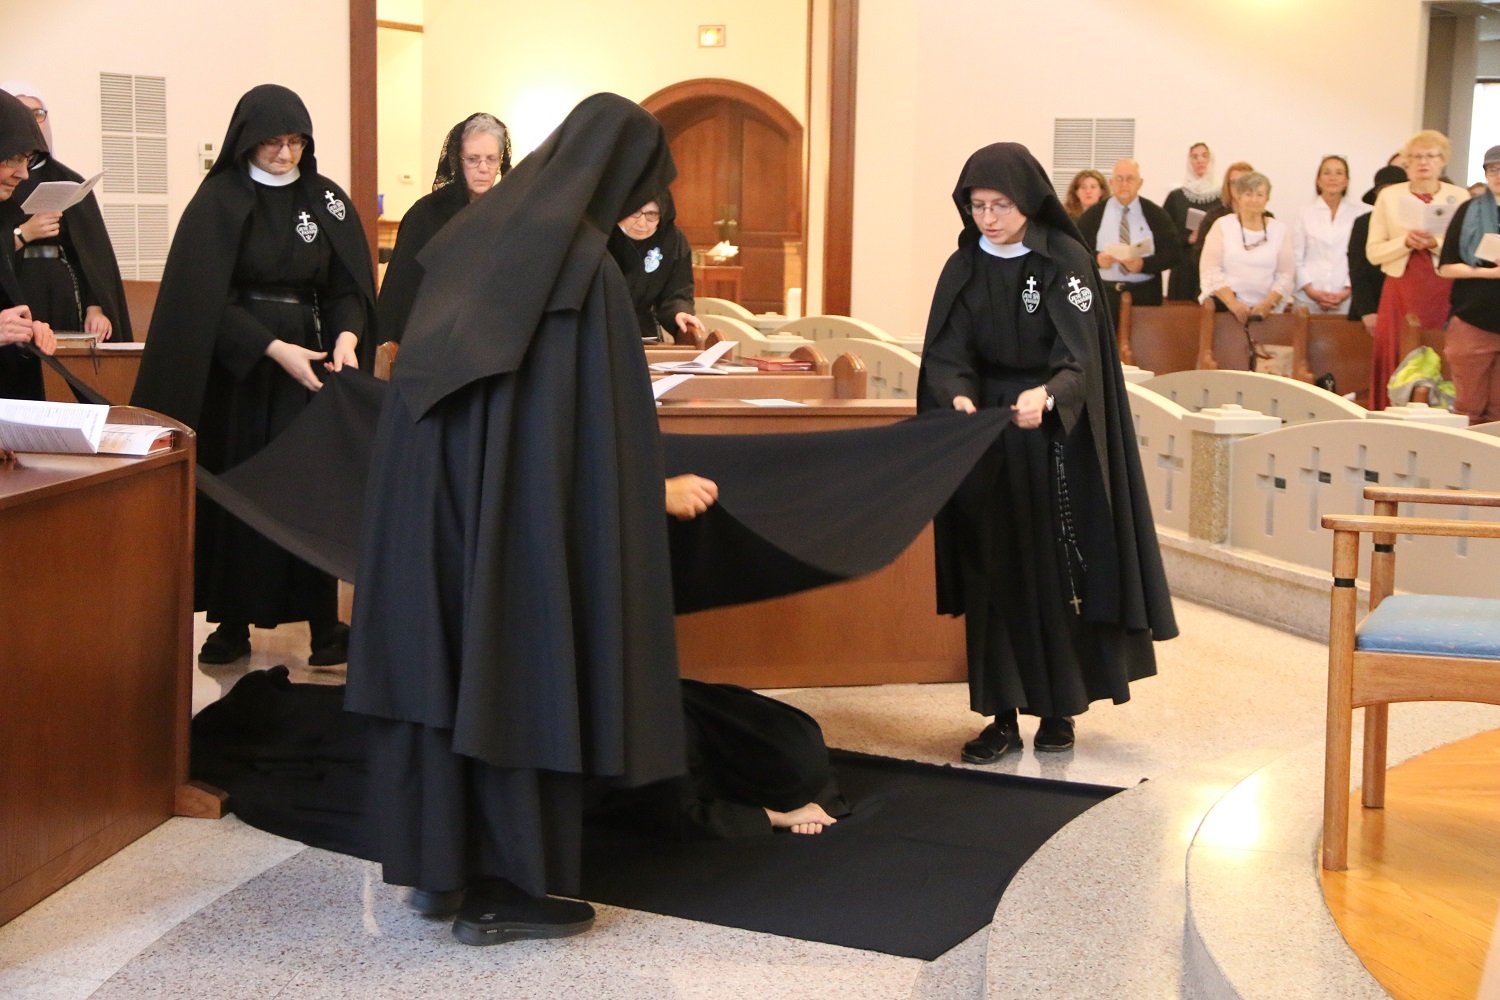  Sr. Maria Faustina falls prostrate before the altar, and her Sisters cover her with a black funeral pall to symbolize her death to self, so that she may rise with Christ.   (Photo: Elizabeth Wong Barnstead, Western KY Catholic)  